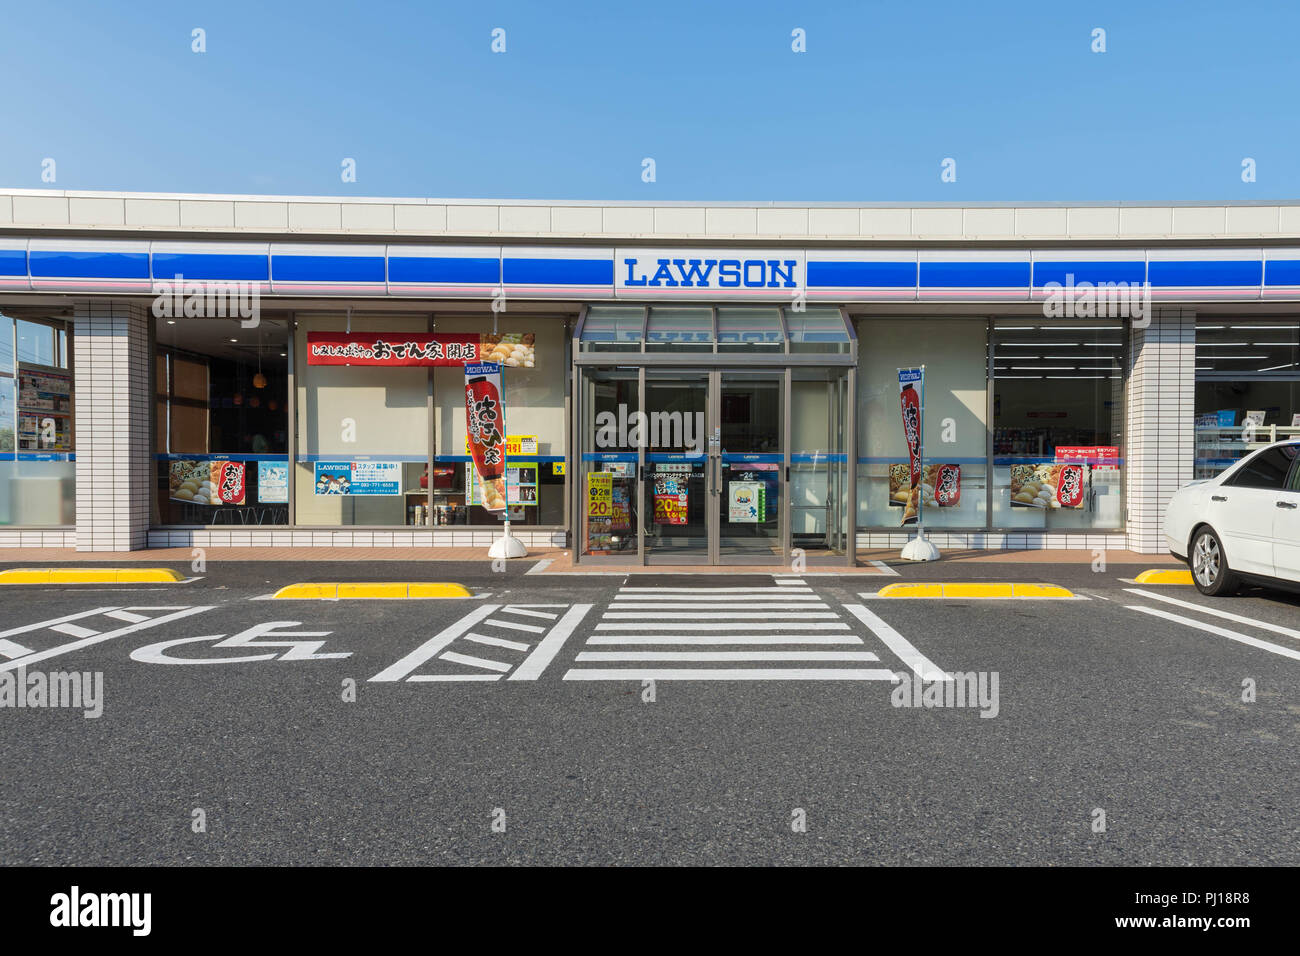 Lawson Convenience Store in Japan Stockfoto